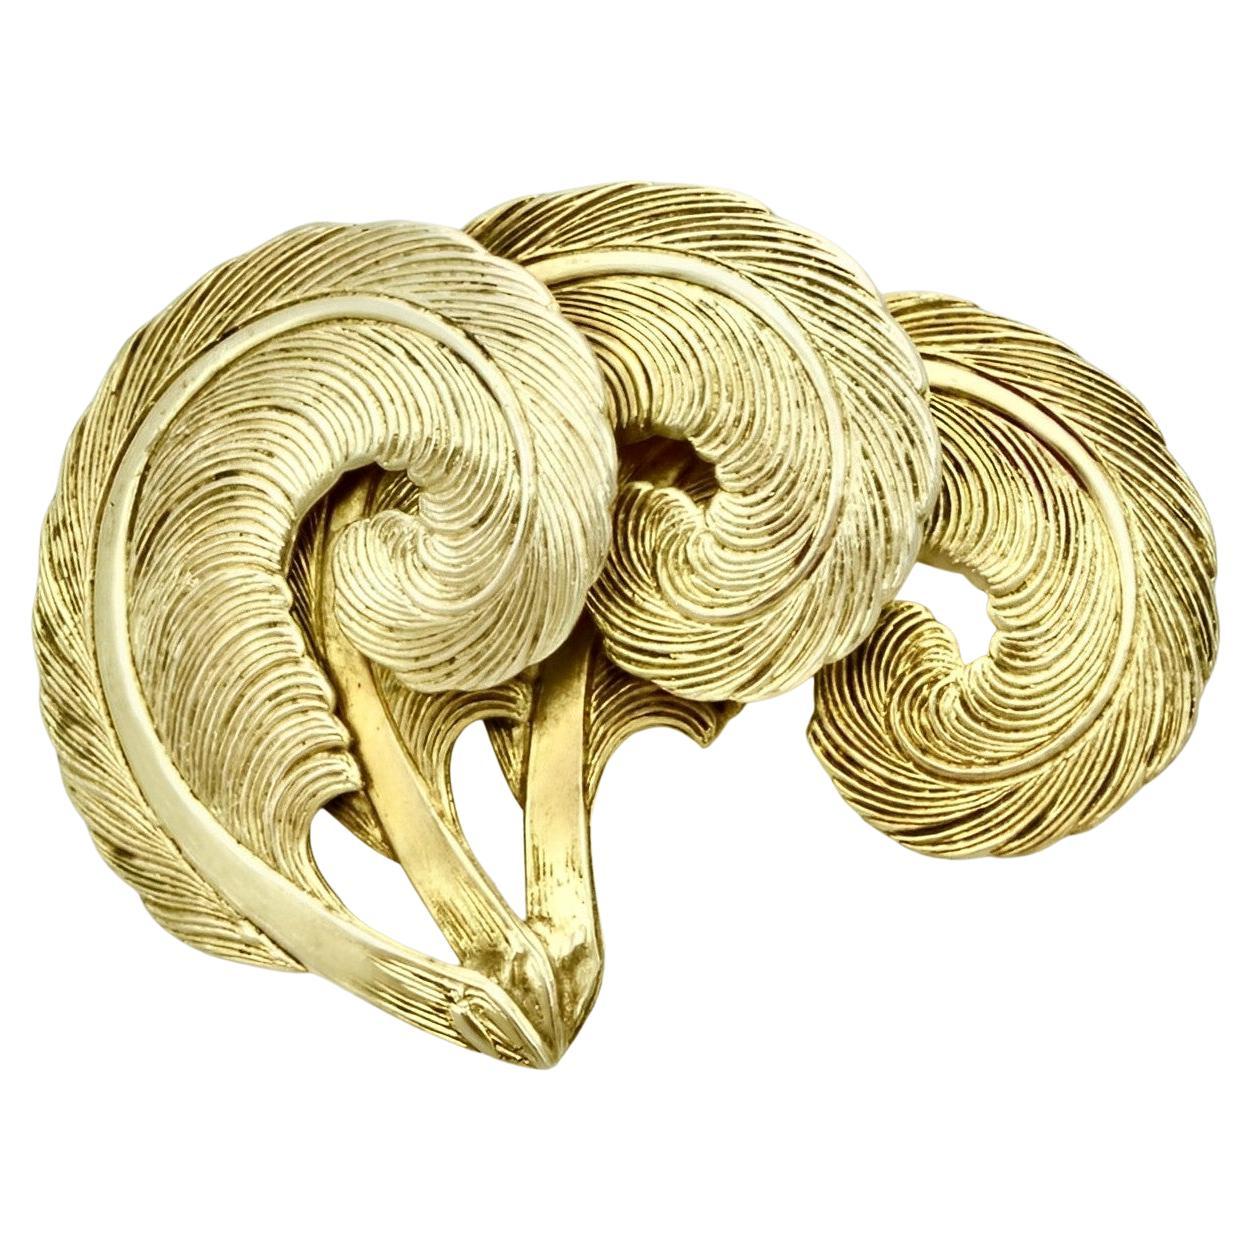 In LVoe with Louis Vuitton: Louis Vuitton Men's Fall Winter 2012 2013  Feather Brooch Pin